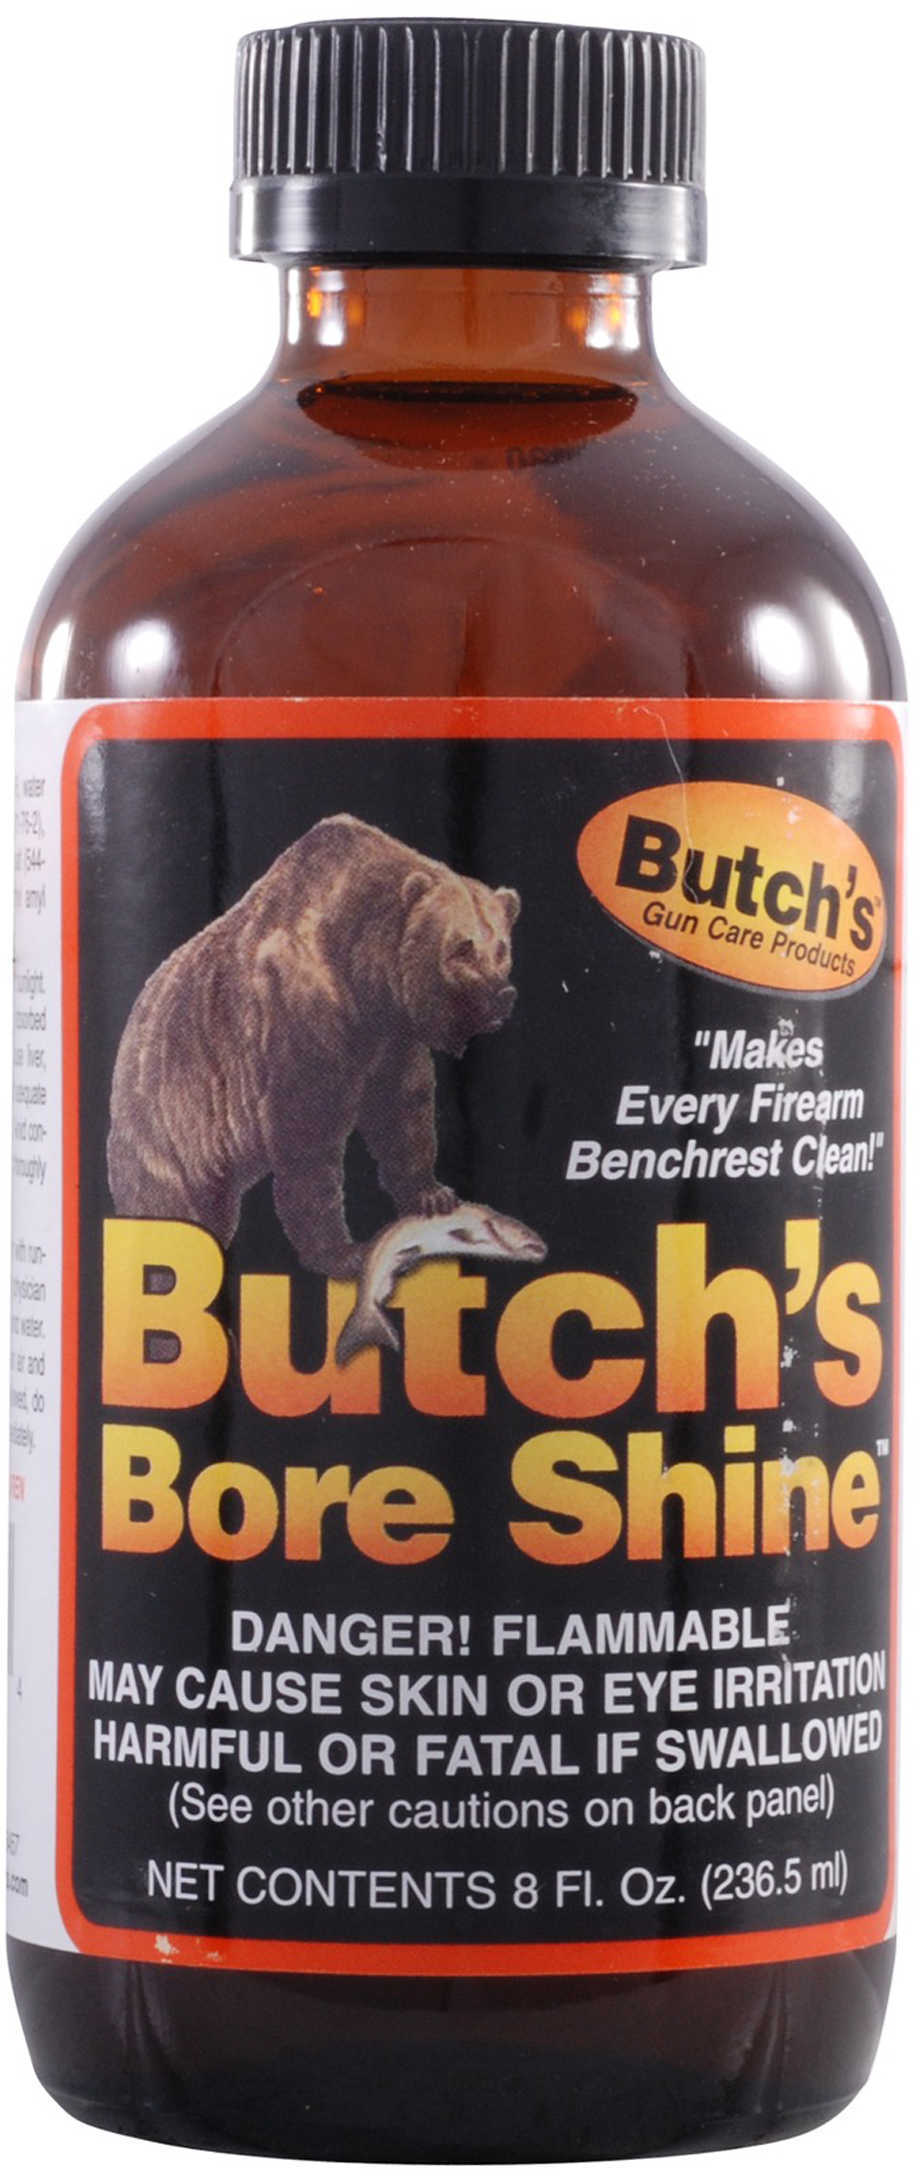 Lyman Butch's Bore Shine 8 Oz Bottle - Removes Powder, Lead And Plastic Fouling faster Than Any Other Cleaner - Odorless